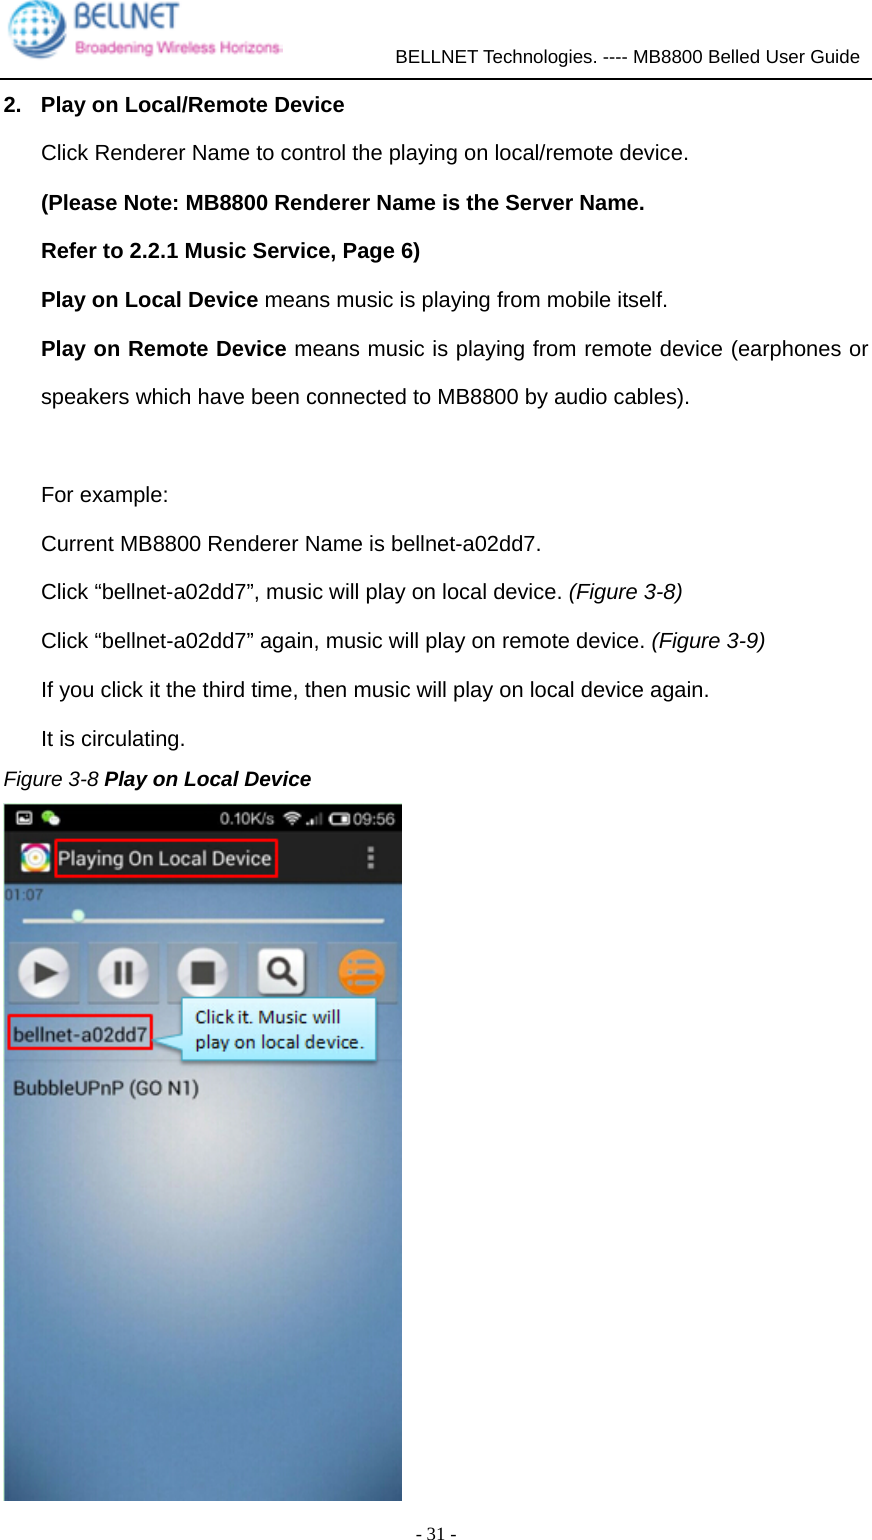             BELLNET Technologies. ---- MB8800 Belled User Guide  - 31 - 2.  Play on Local/Remote Device Click Renderer Name to control the playing on local/remote device. (Please Note: MB8800 Renderer Name is the Server Name.   Refer to 2.2.1 Music Service, Page 6) Play on Local Device means music is playing from mobile itself. Play on Remote Device means music is playing from remote device (earphones or speakers which have been connected to MB8800 by audio cables).  For example: Current MB8800 Renderer Name is bellnet-a02dd7. Click “bellnet-a02dd7”, music will play on local device. (Figure 3-8) Click “bellnet-a02dd7” again, music will play on remote device. (Figure 3-9) If you click it the third time, then music will play on local device again. It is circulating. Figure 3-8 Play on Local Device  